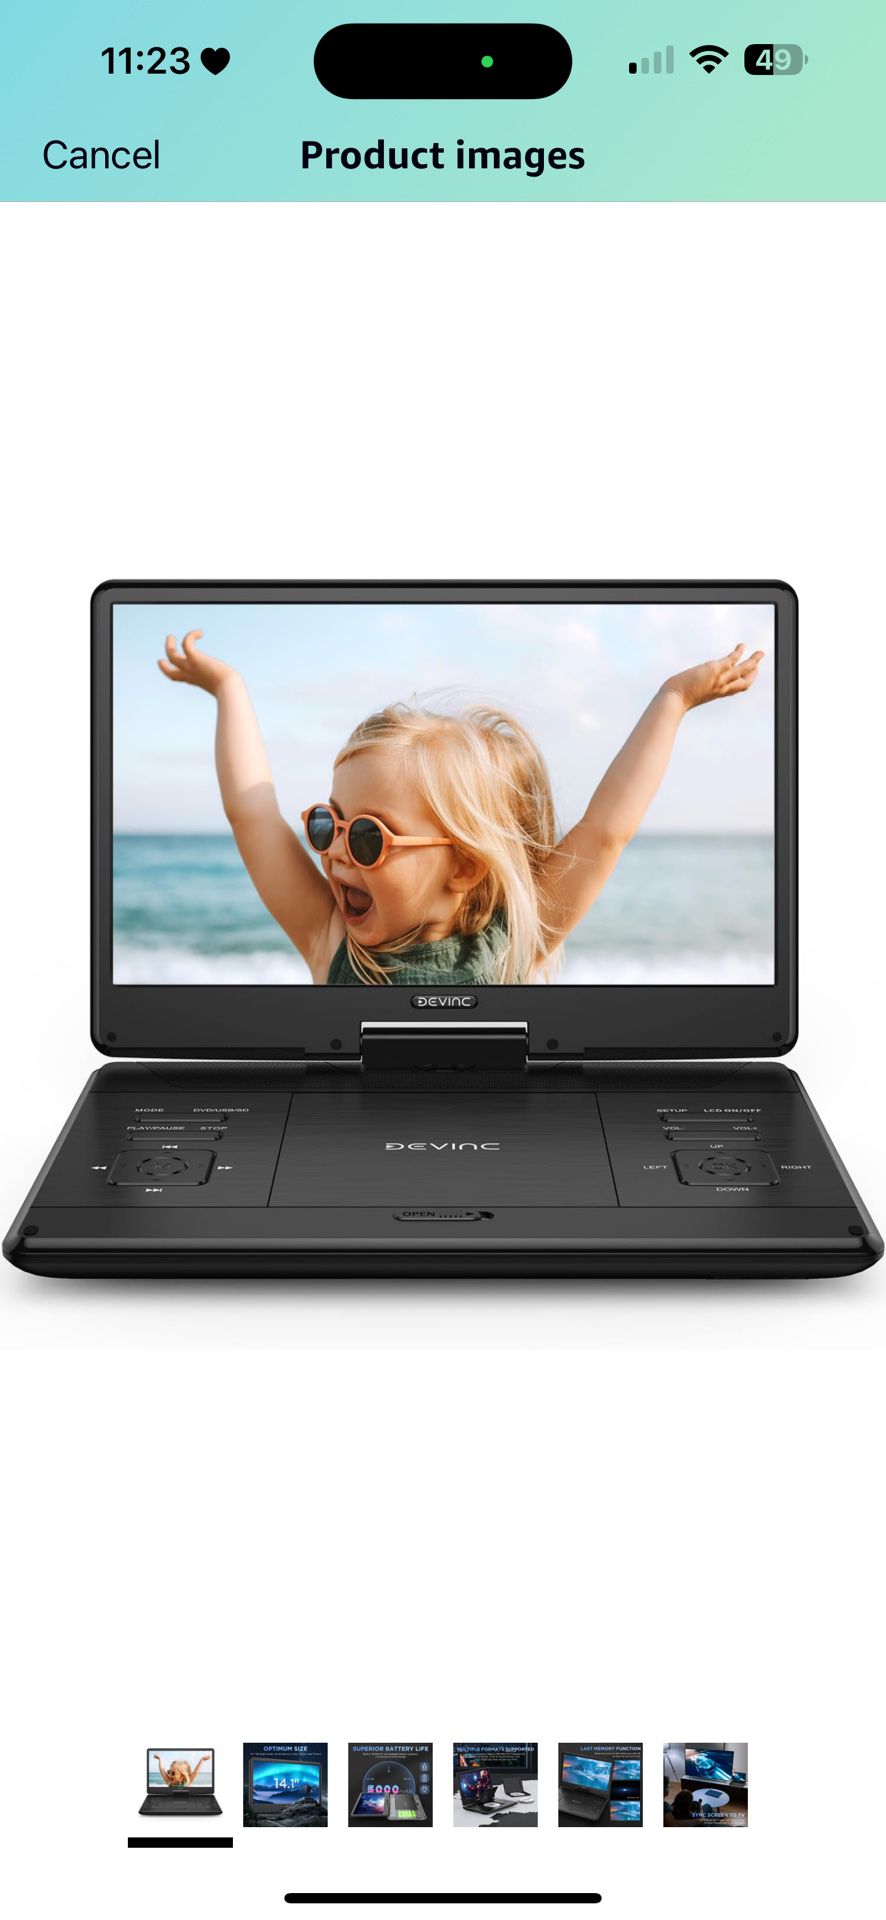 16.9" Portable DVD Player with 14.1" Large HD Screen, Support Multiple DVD CD Formats/USB/SD Card, 6 Hours Rechargeable Battery, Sync TV, Dual Speaker